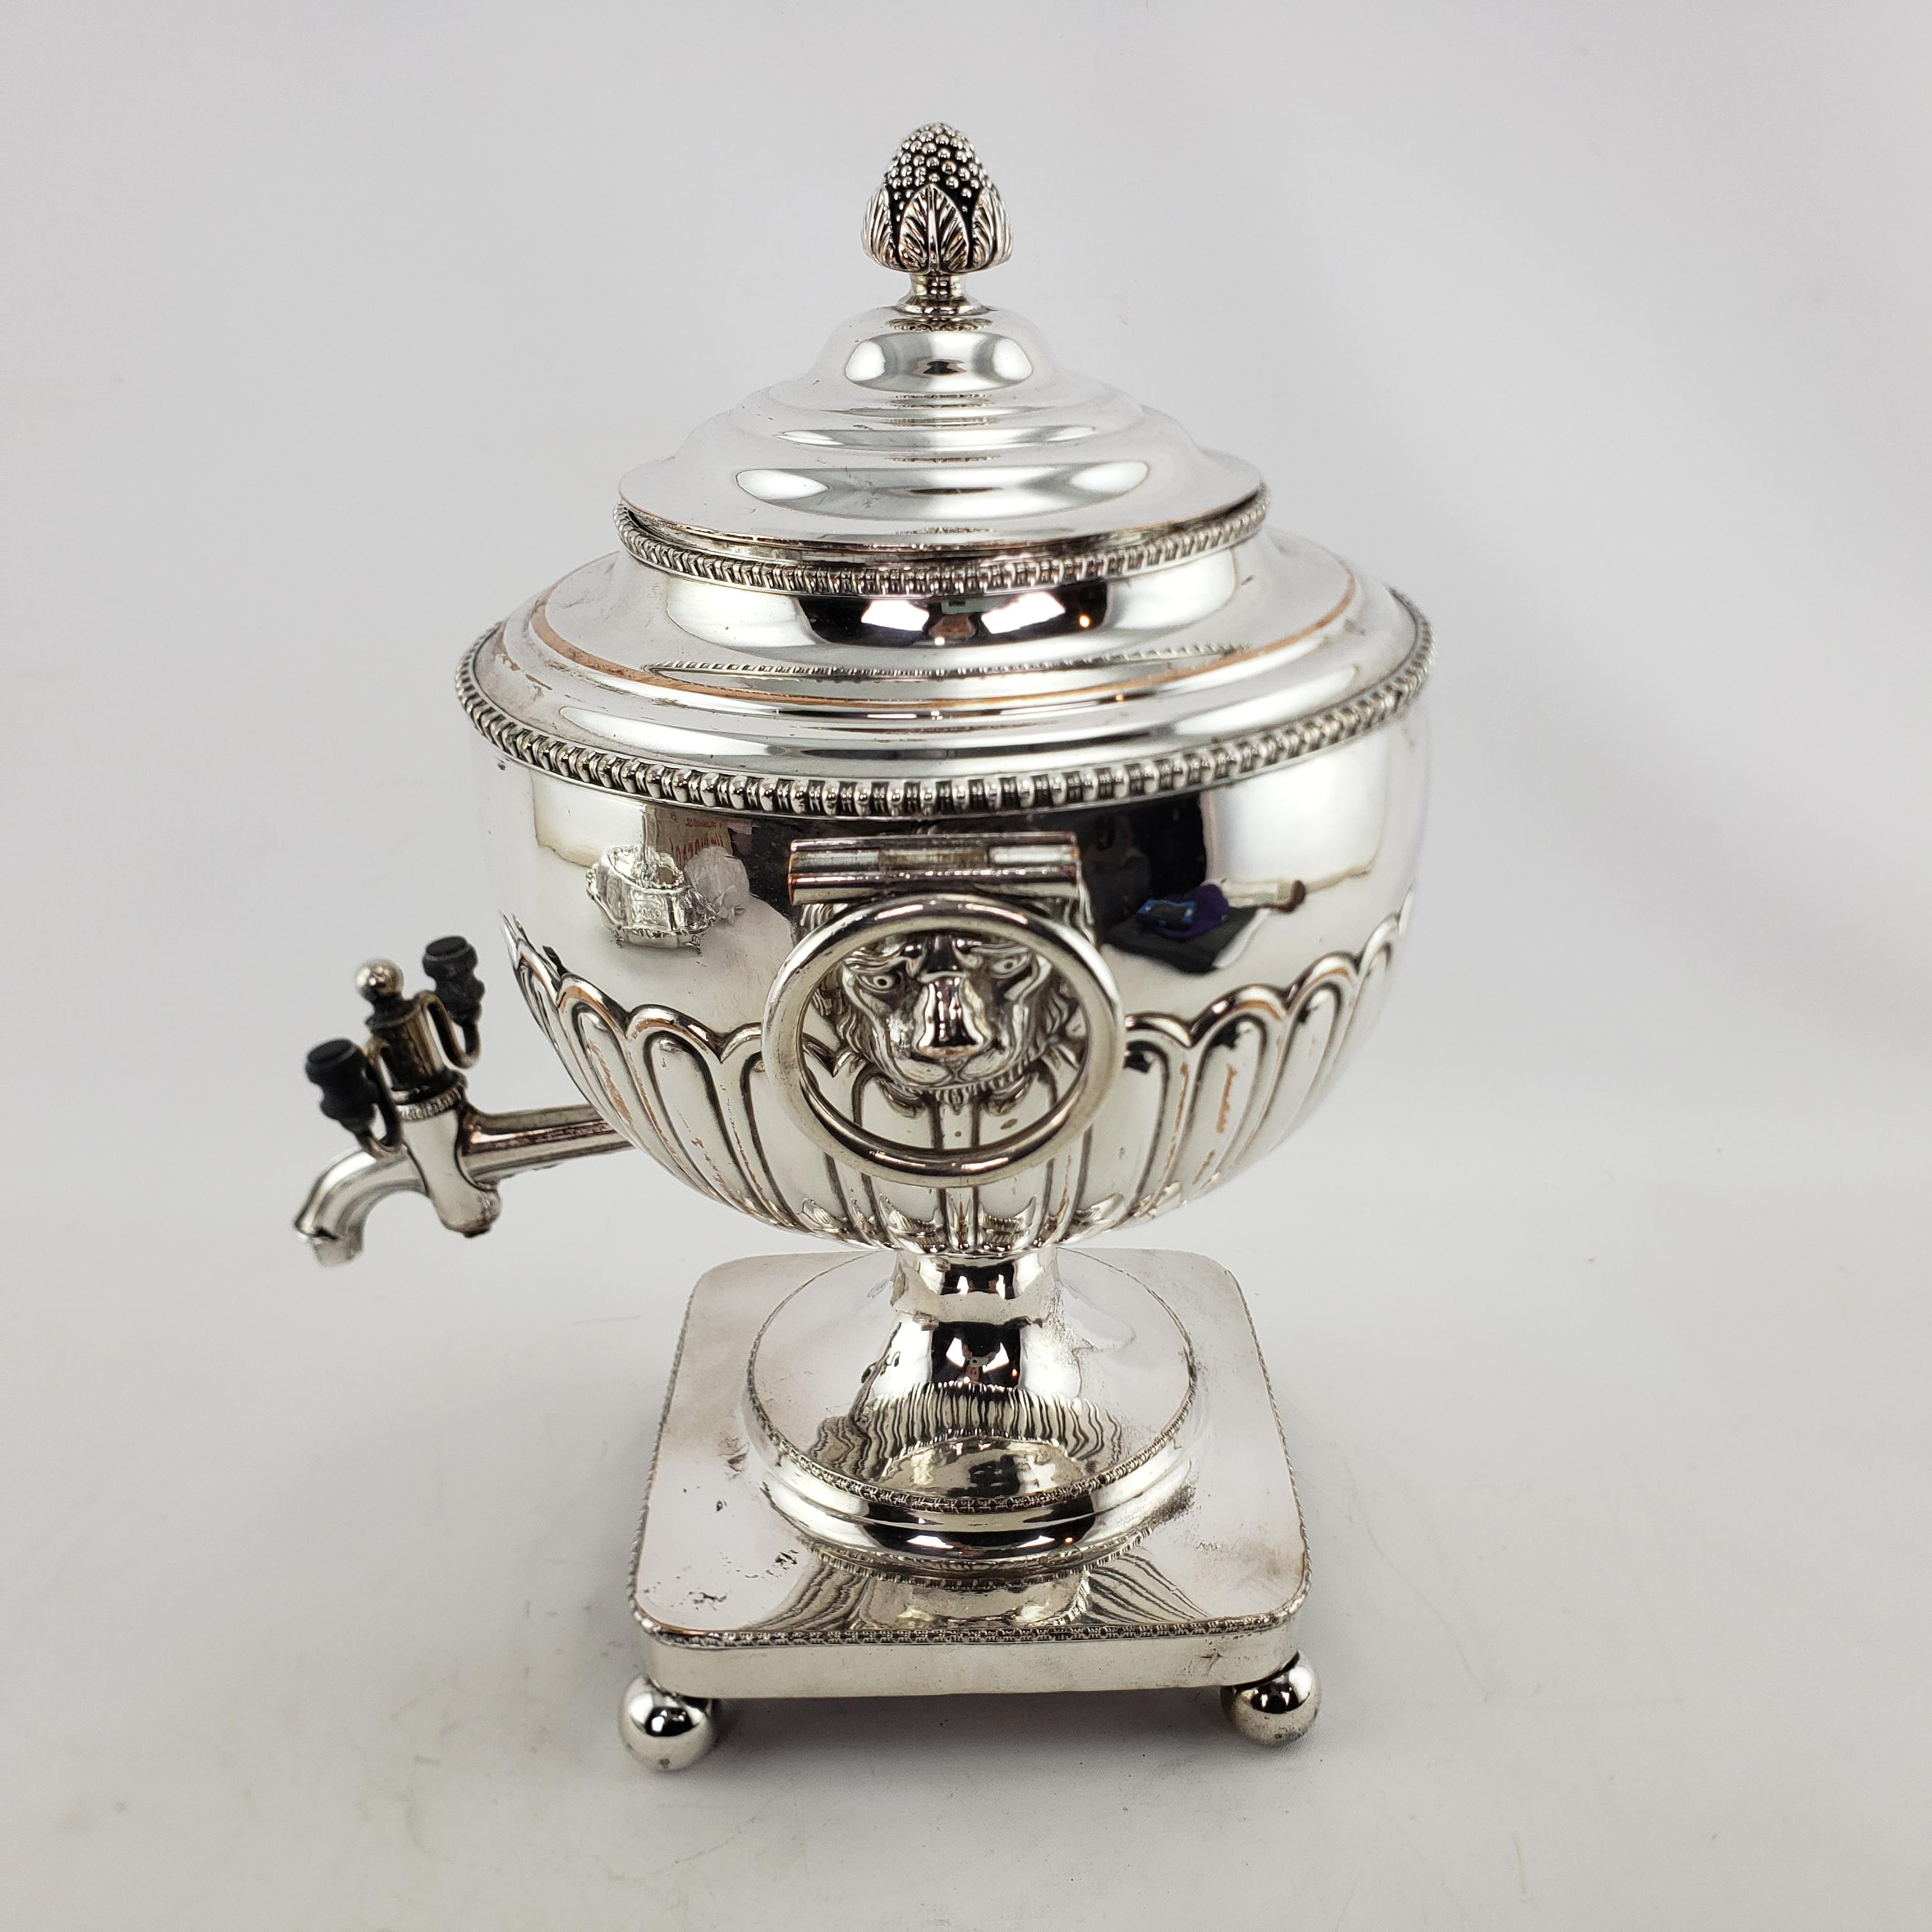 Antique Georgian Styled Silver Plated Tea or Hot Water Urn with Lion Mounts For Sale 1